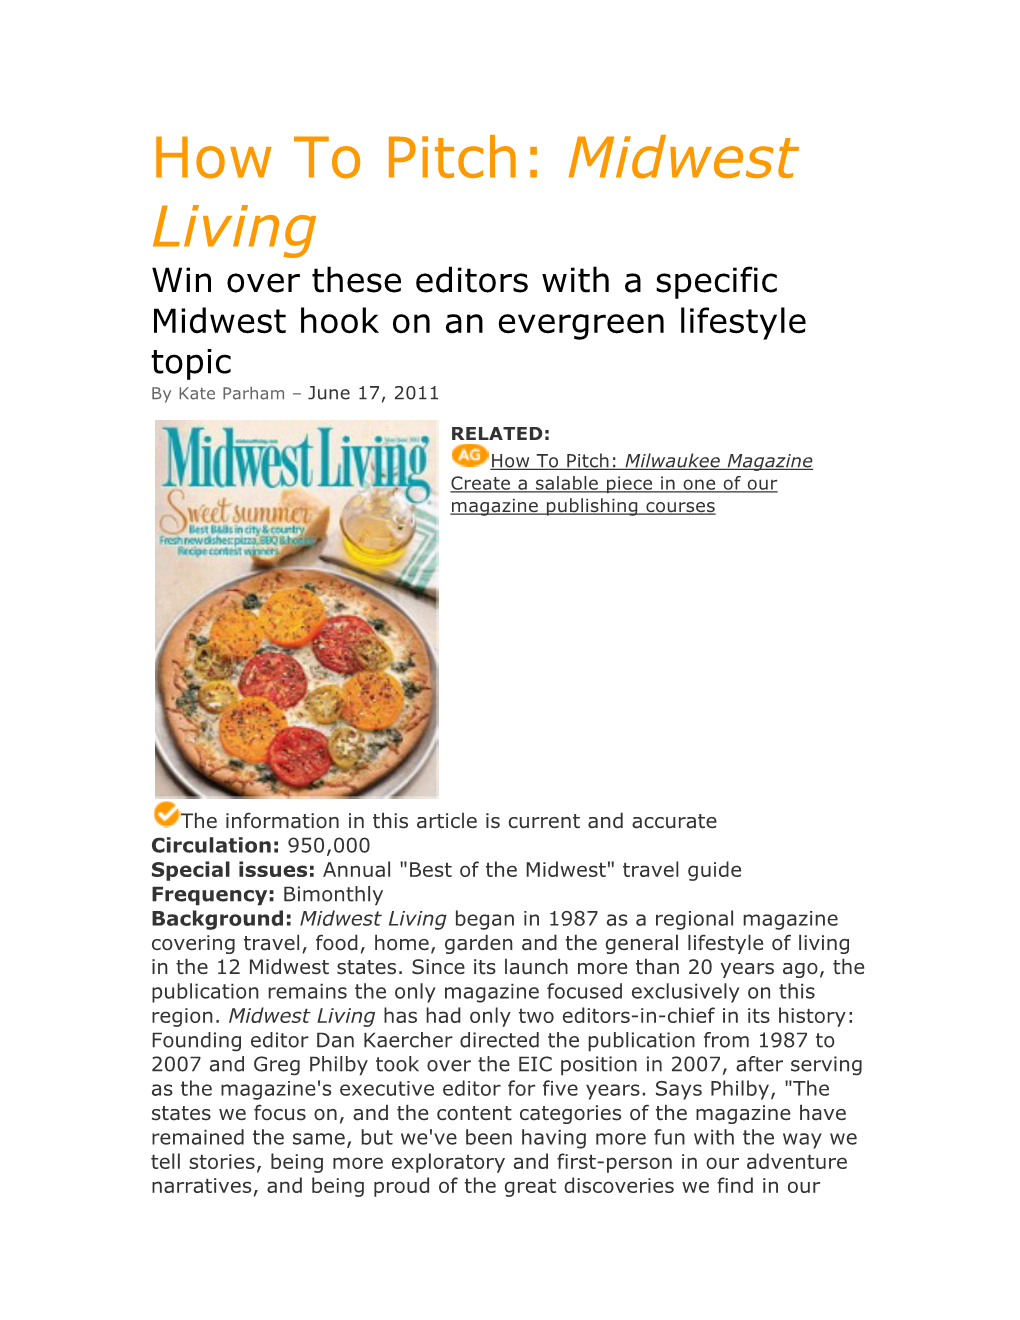 Midwest Living Win Over These Editors with a Specific Midwest Hook on an Evergreen Lifestyle Topic by Kate Parham – June 17, 2011